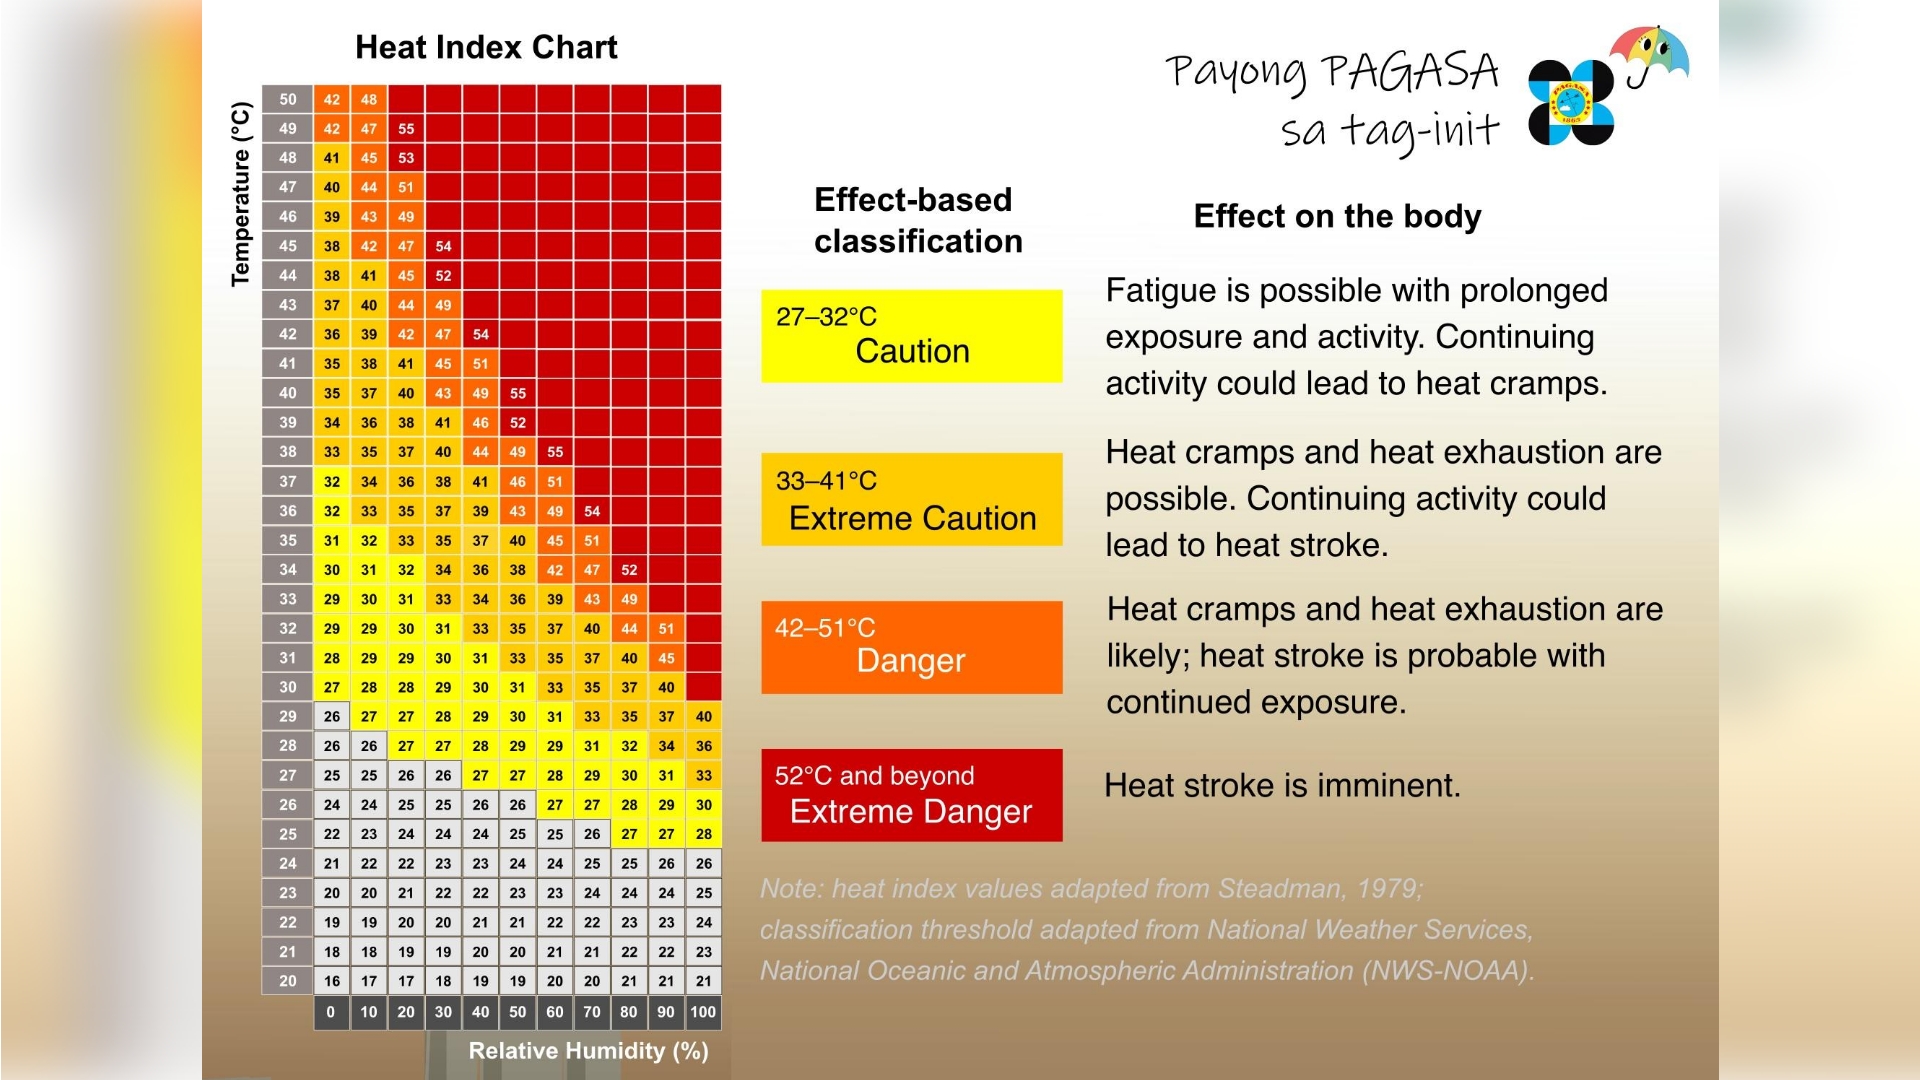 Dangerous Heat Index Expected in 17 Areas on Wednesday, Says PAGASA